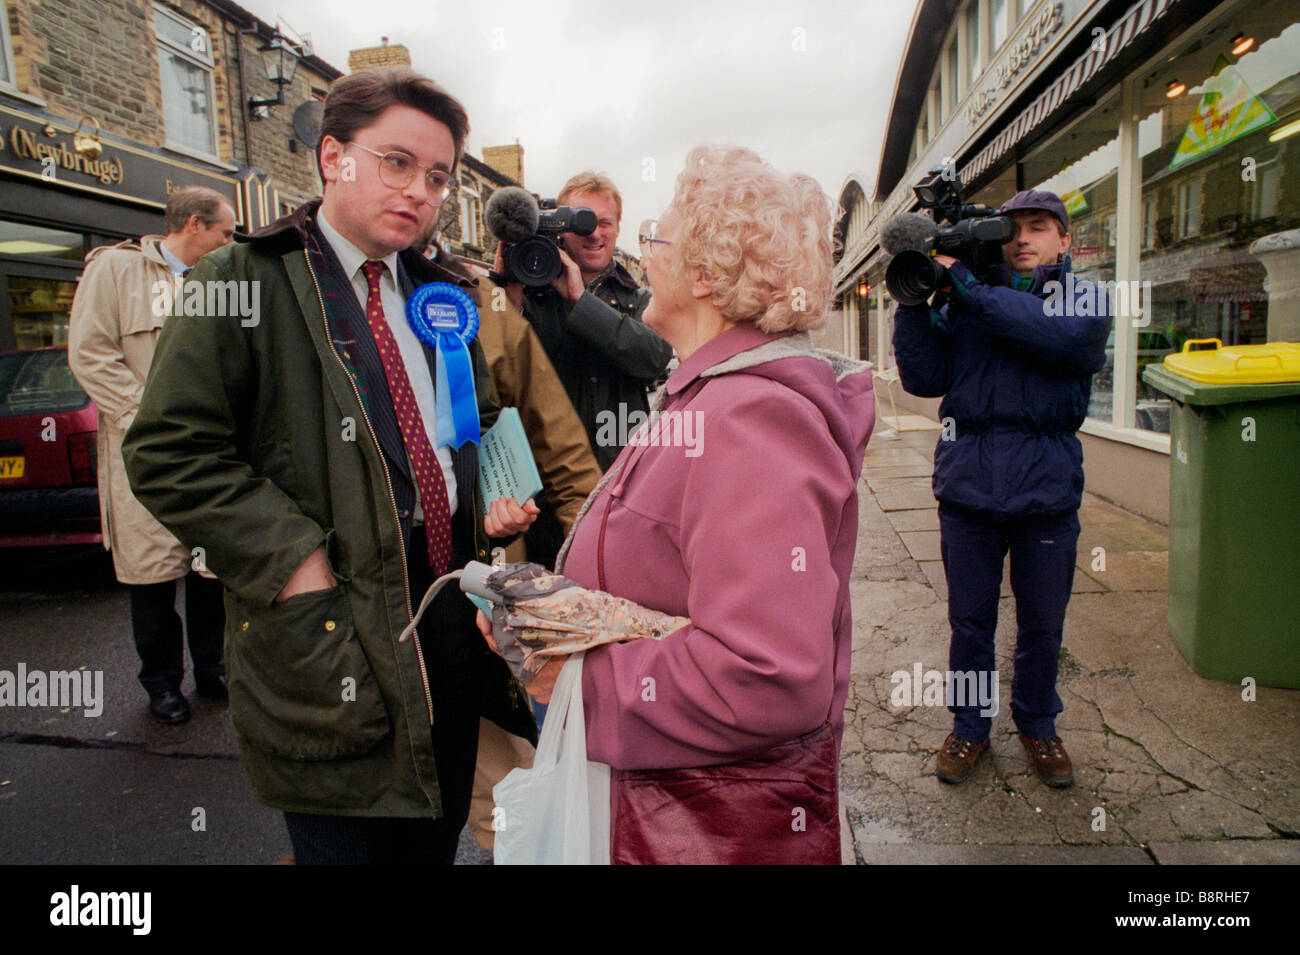 Tory Party candidate campaigning and being filmed by TV news cameramen during Islwyn byelection South Wales UK Stock Photo